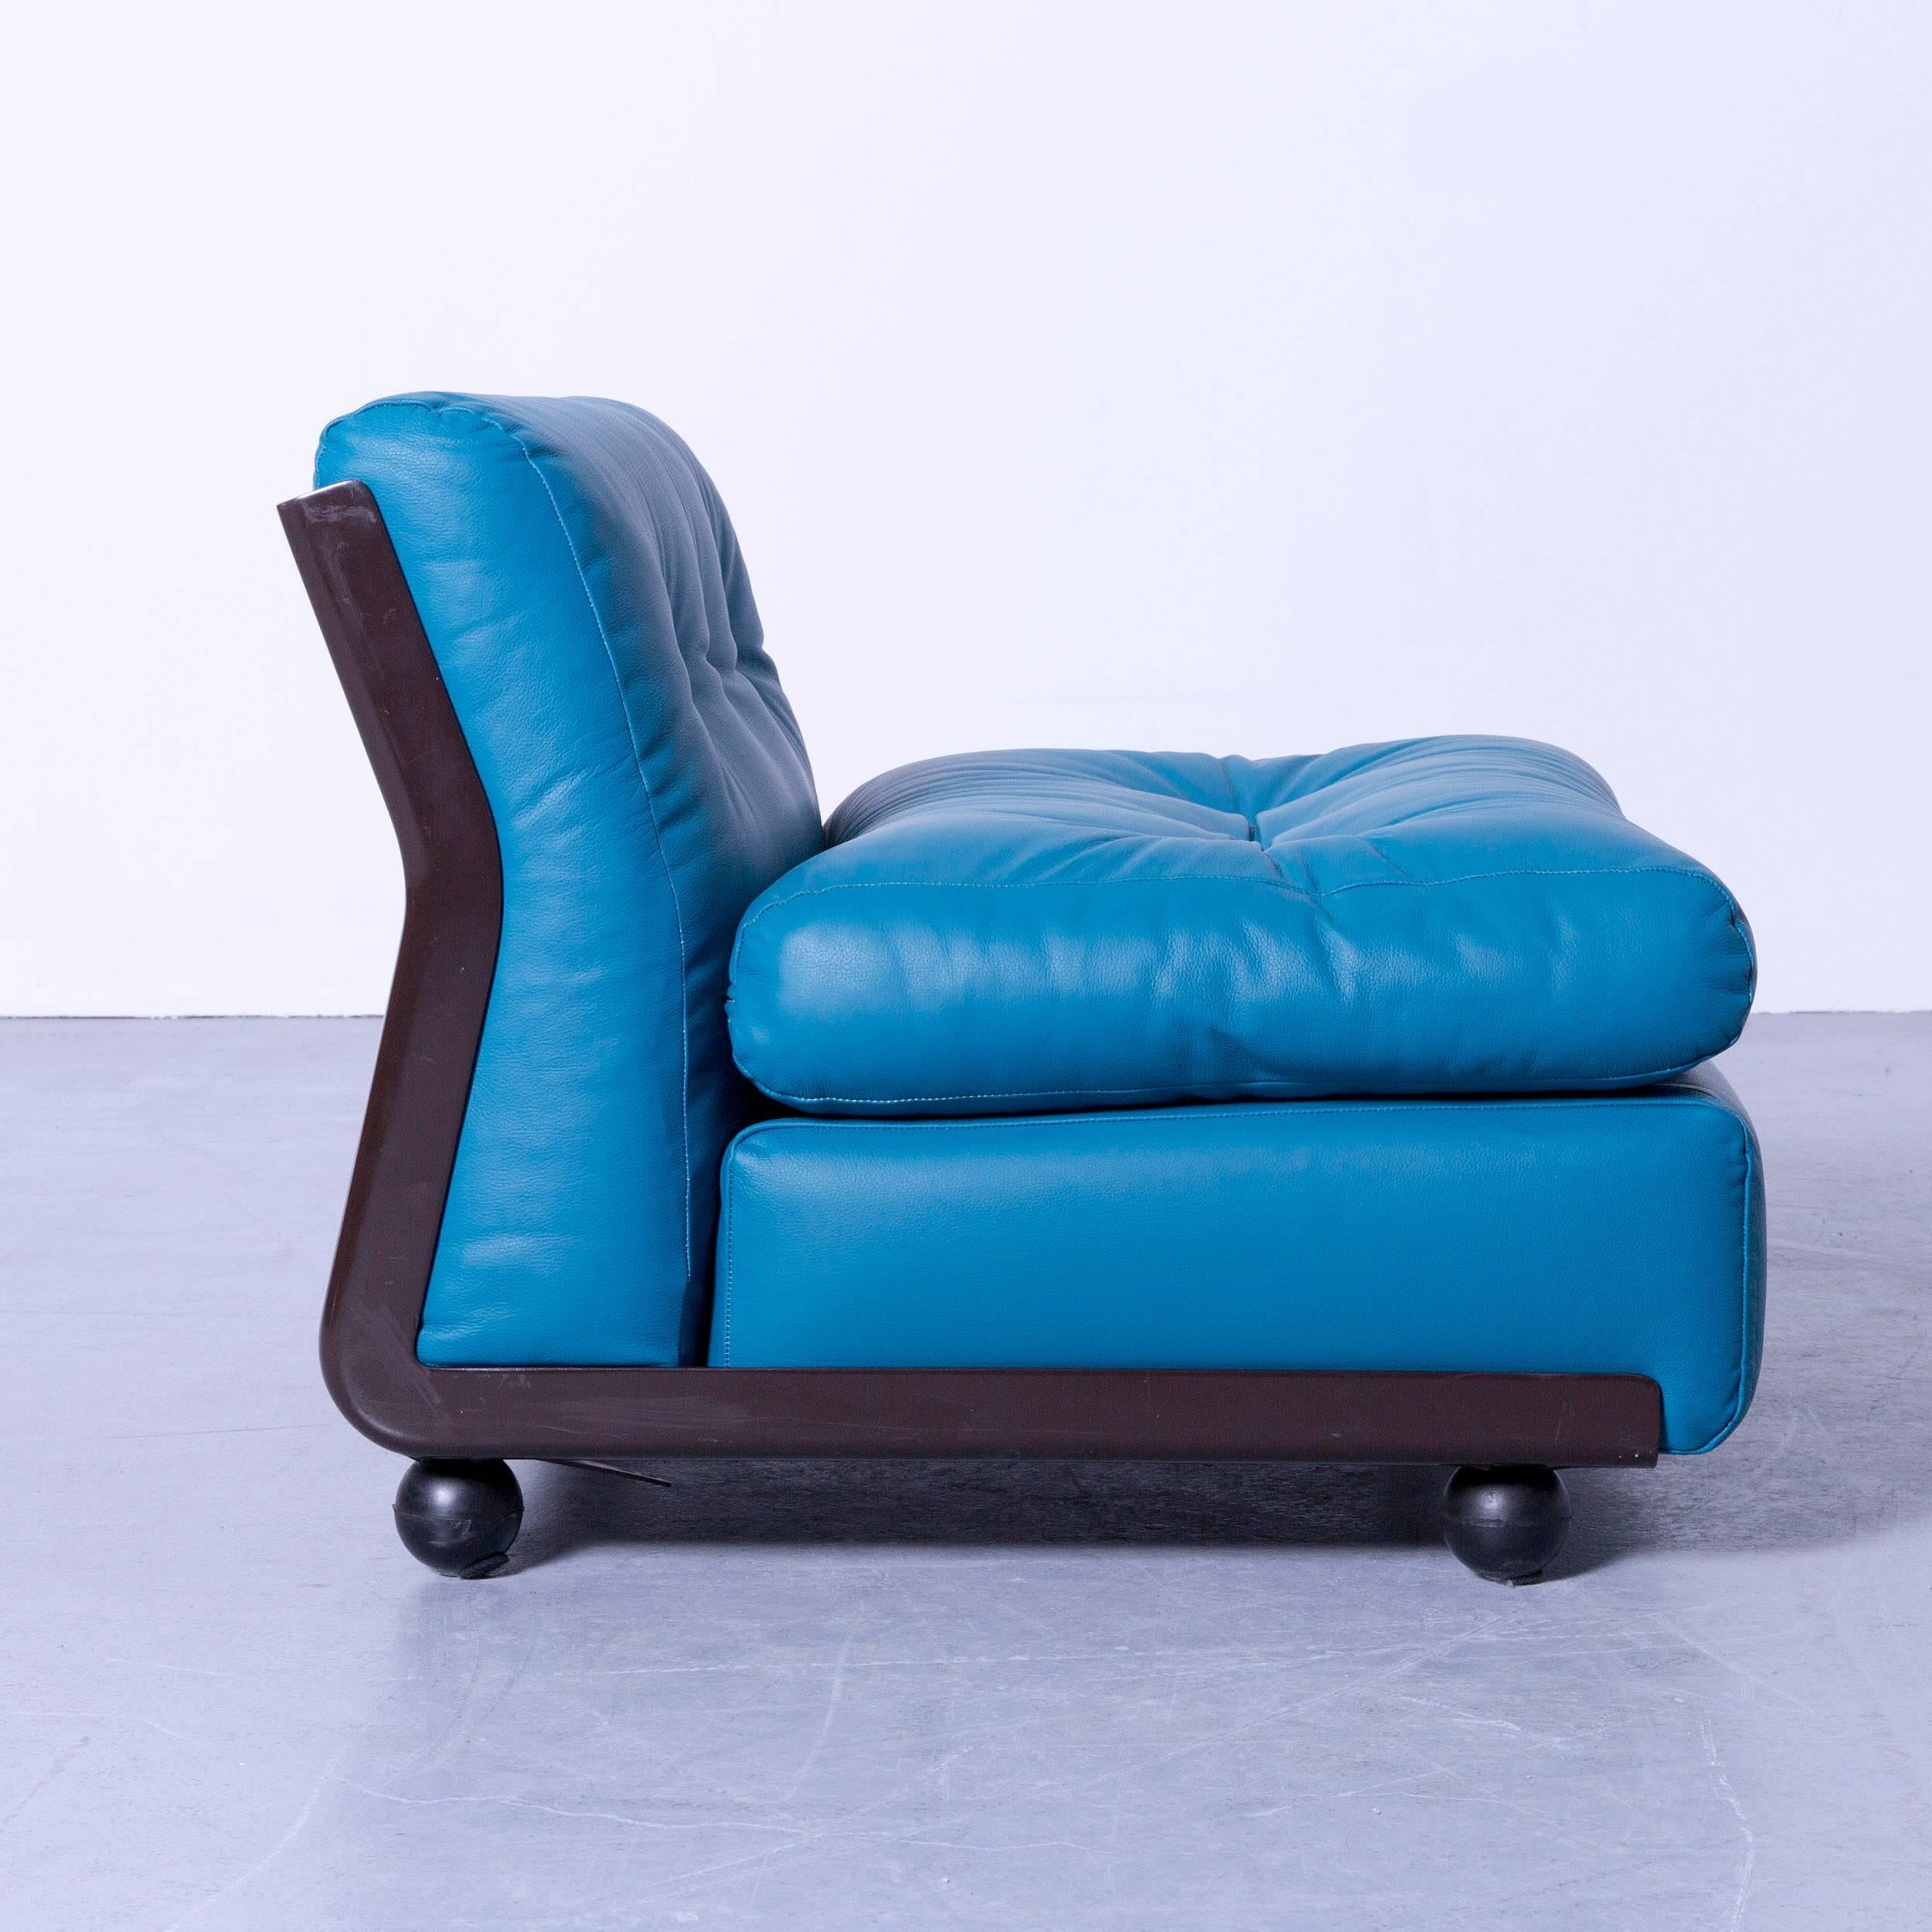 Leather B&B Italia Amanta Designer Lounge Chair by Mario Bellini Turquoise For Sale